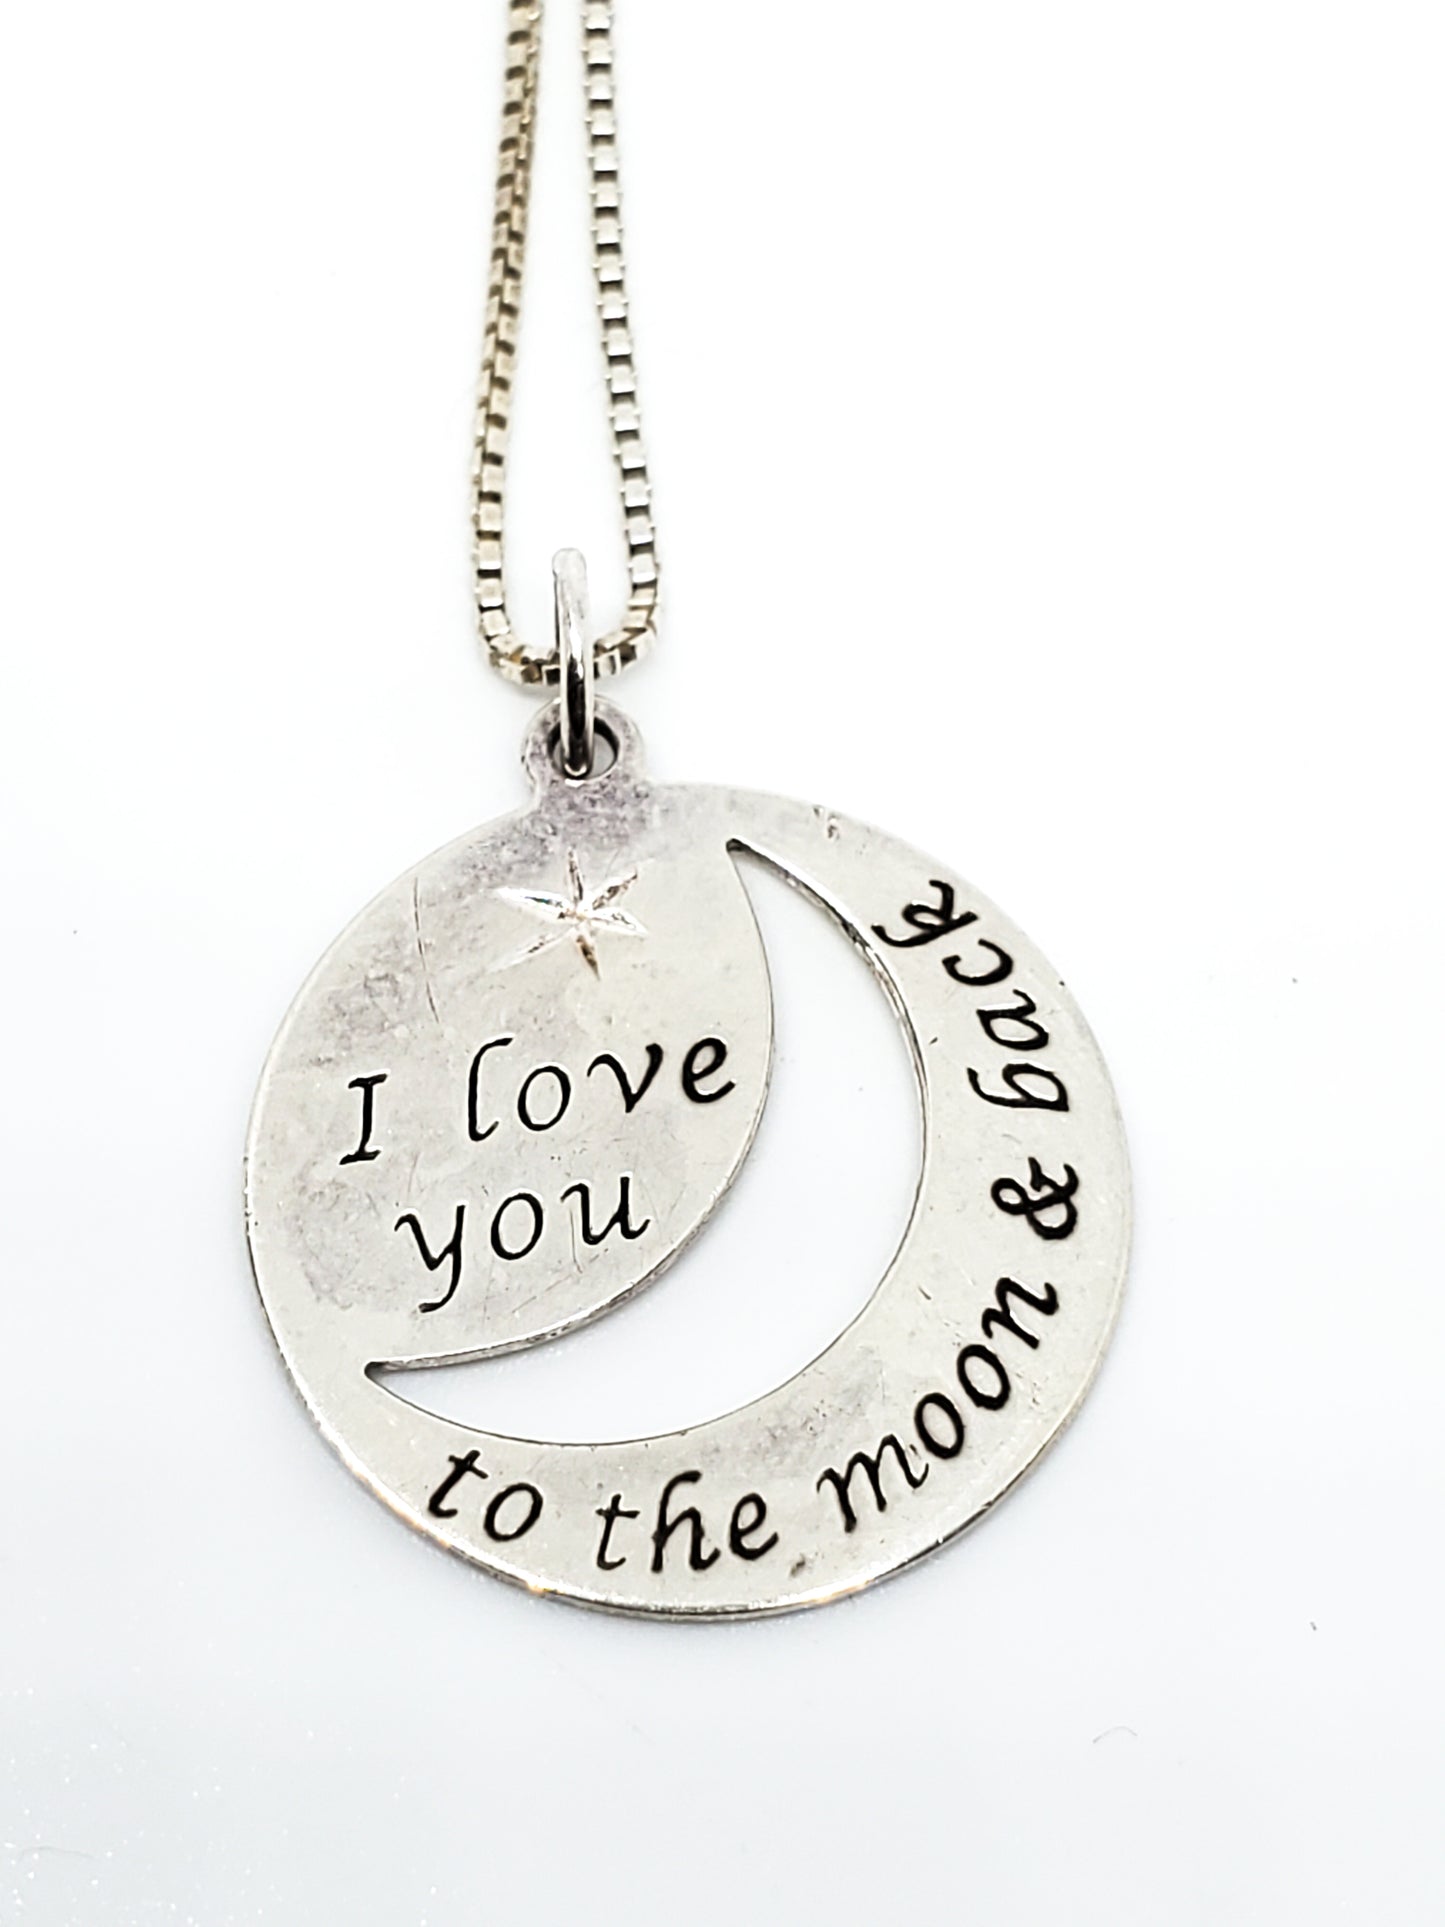 RJ Graziano I love you to the moon and back sterling silver pendant necklace 925